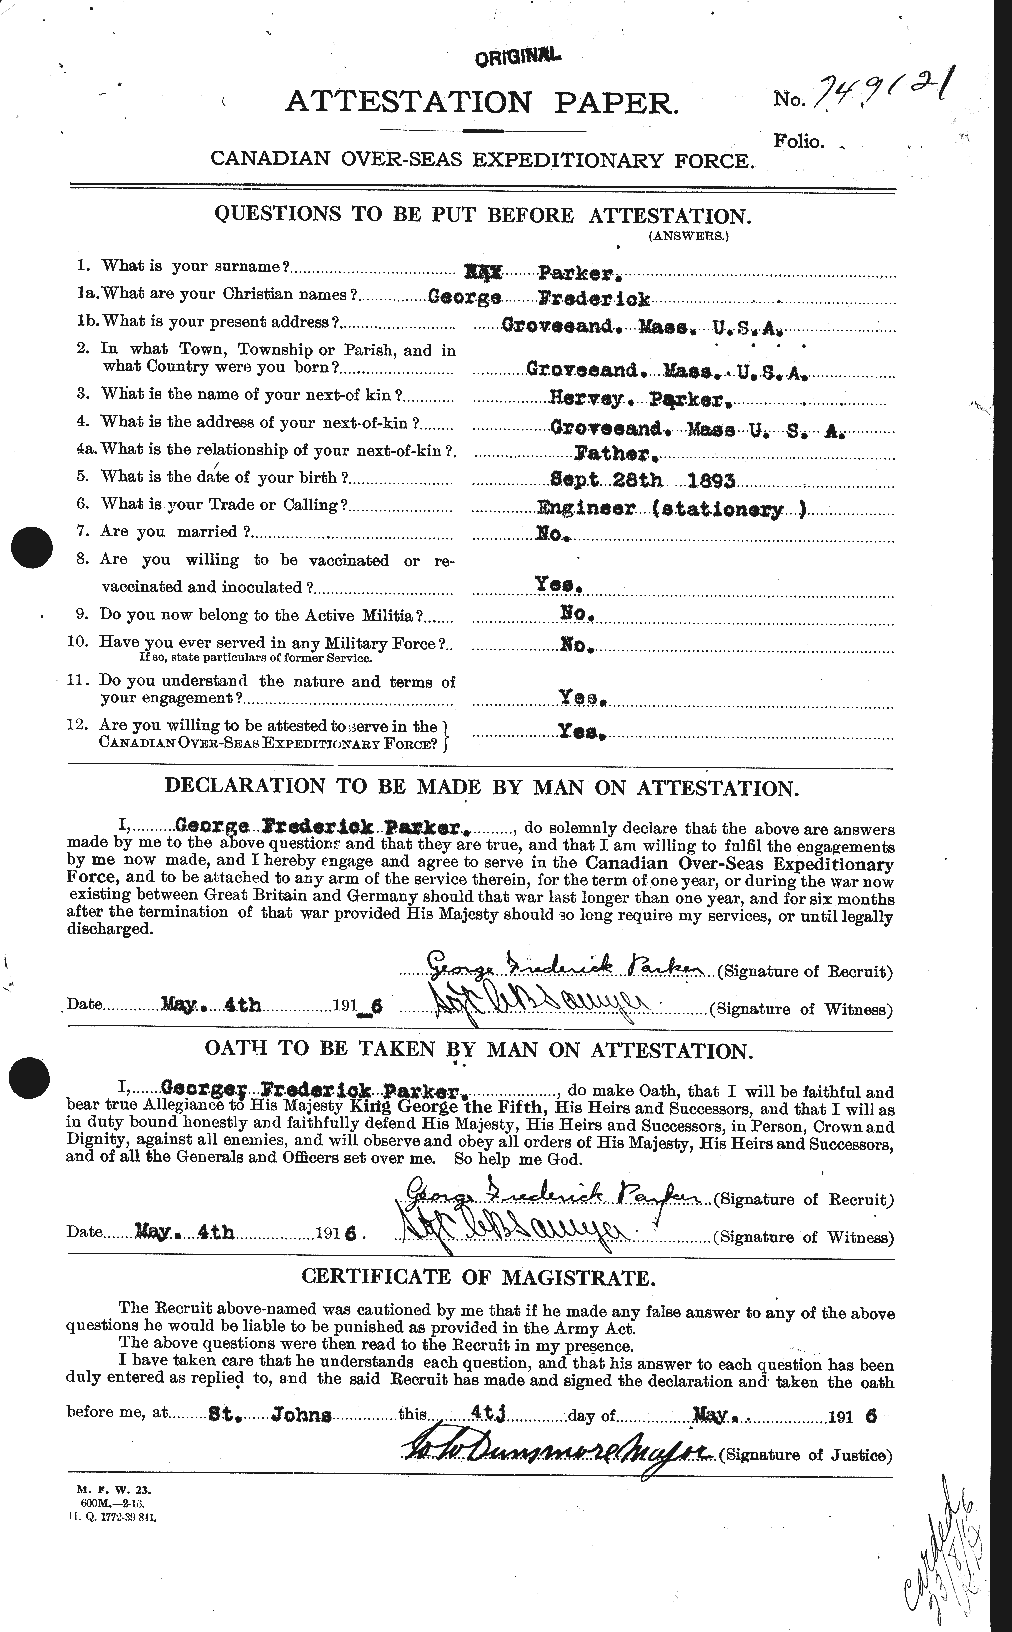 Personnel Records of the First World War - CEF 565261a